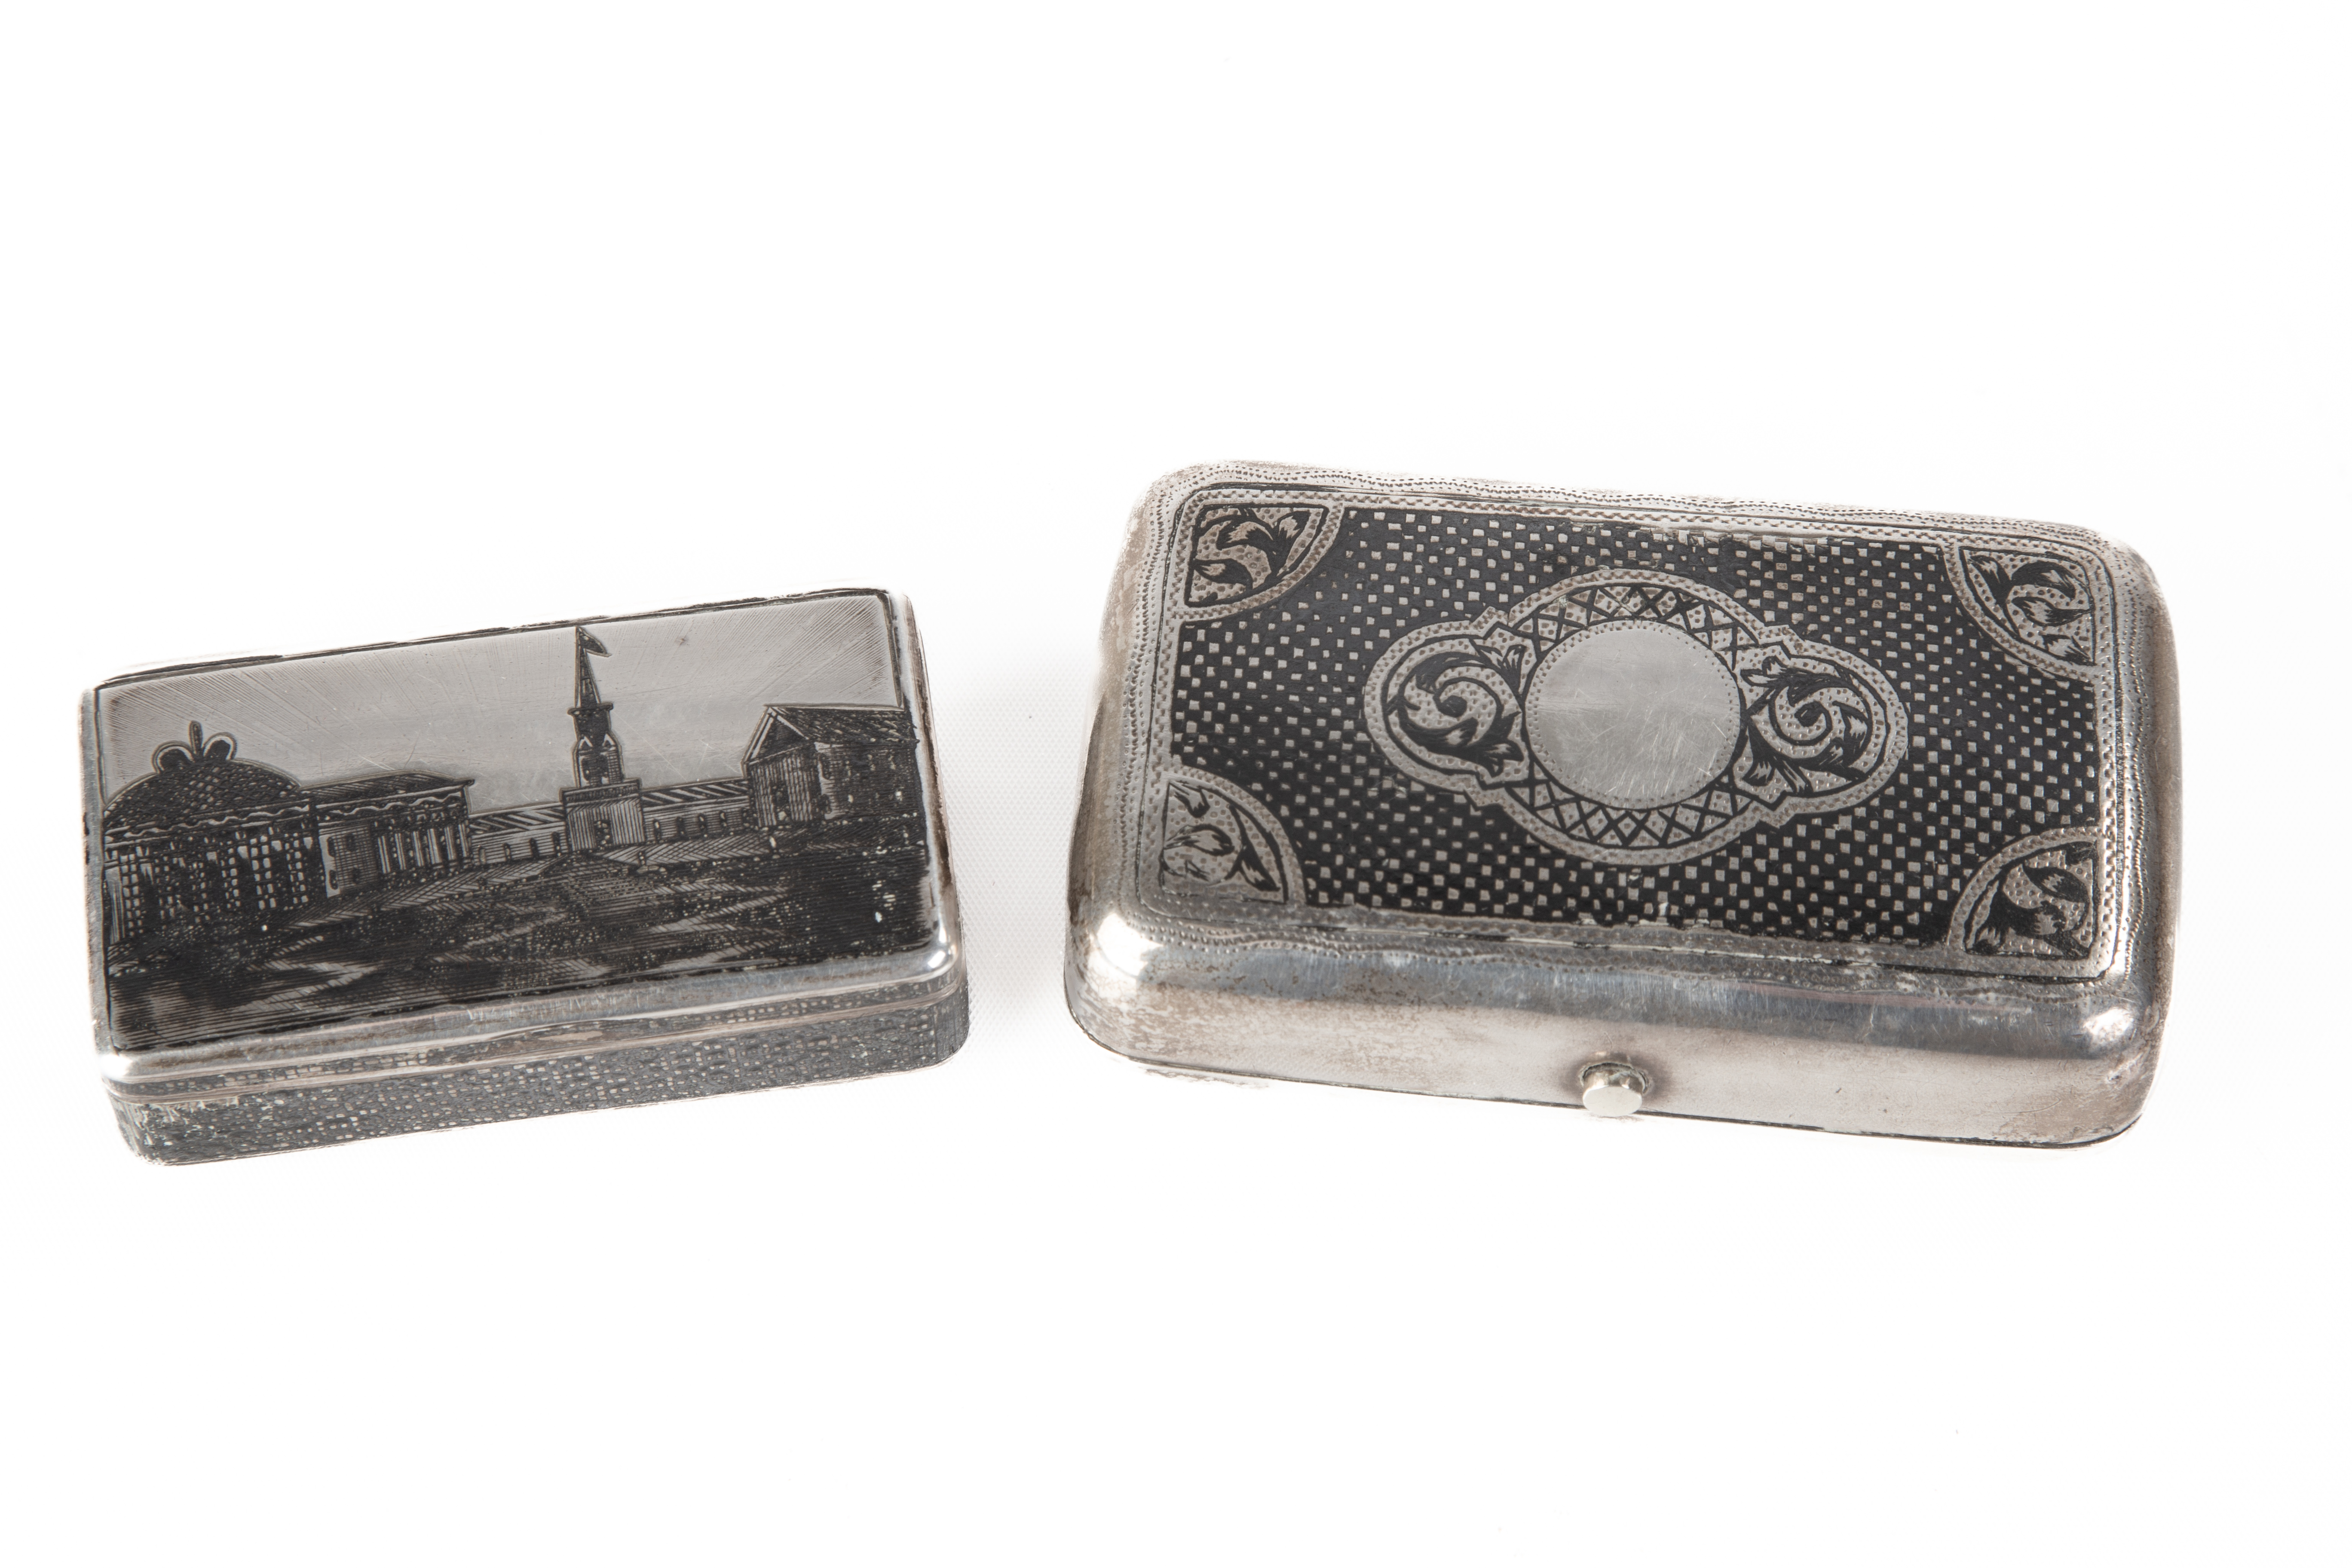 TWO RUSSIAN ENGRAVED SILVER BOXES 2f36b8